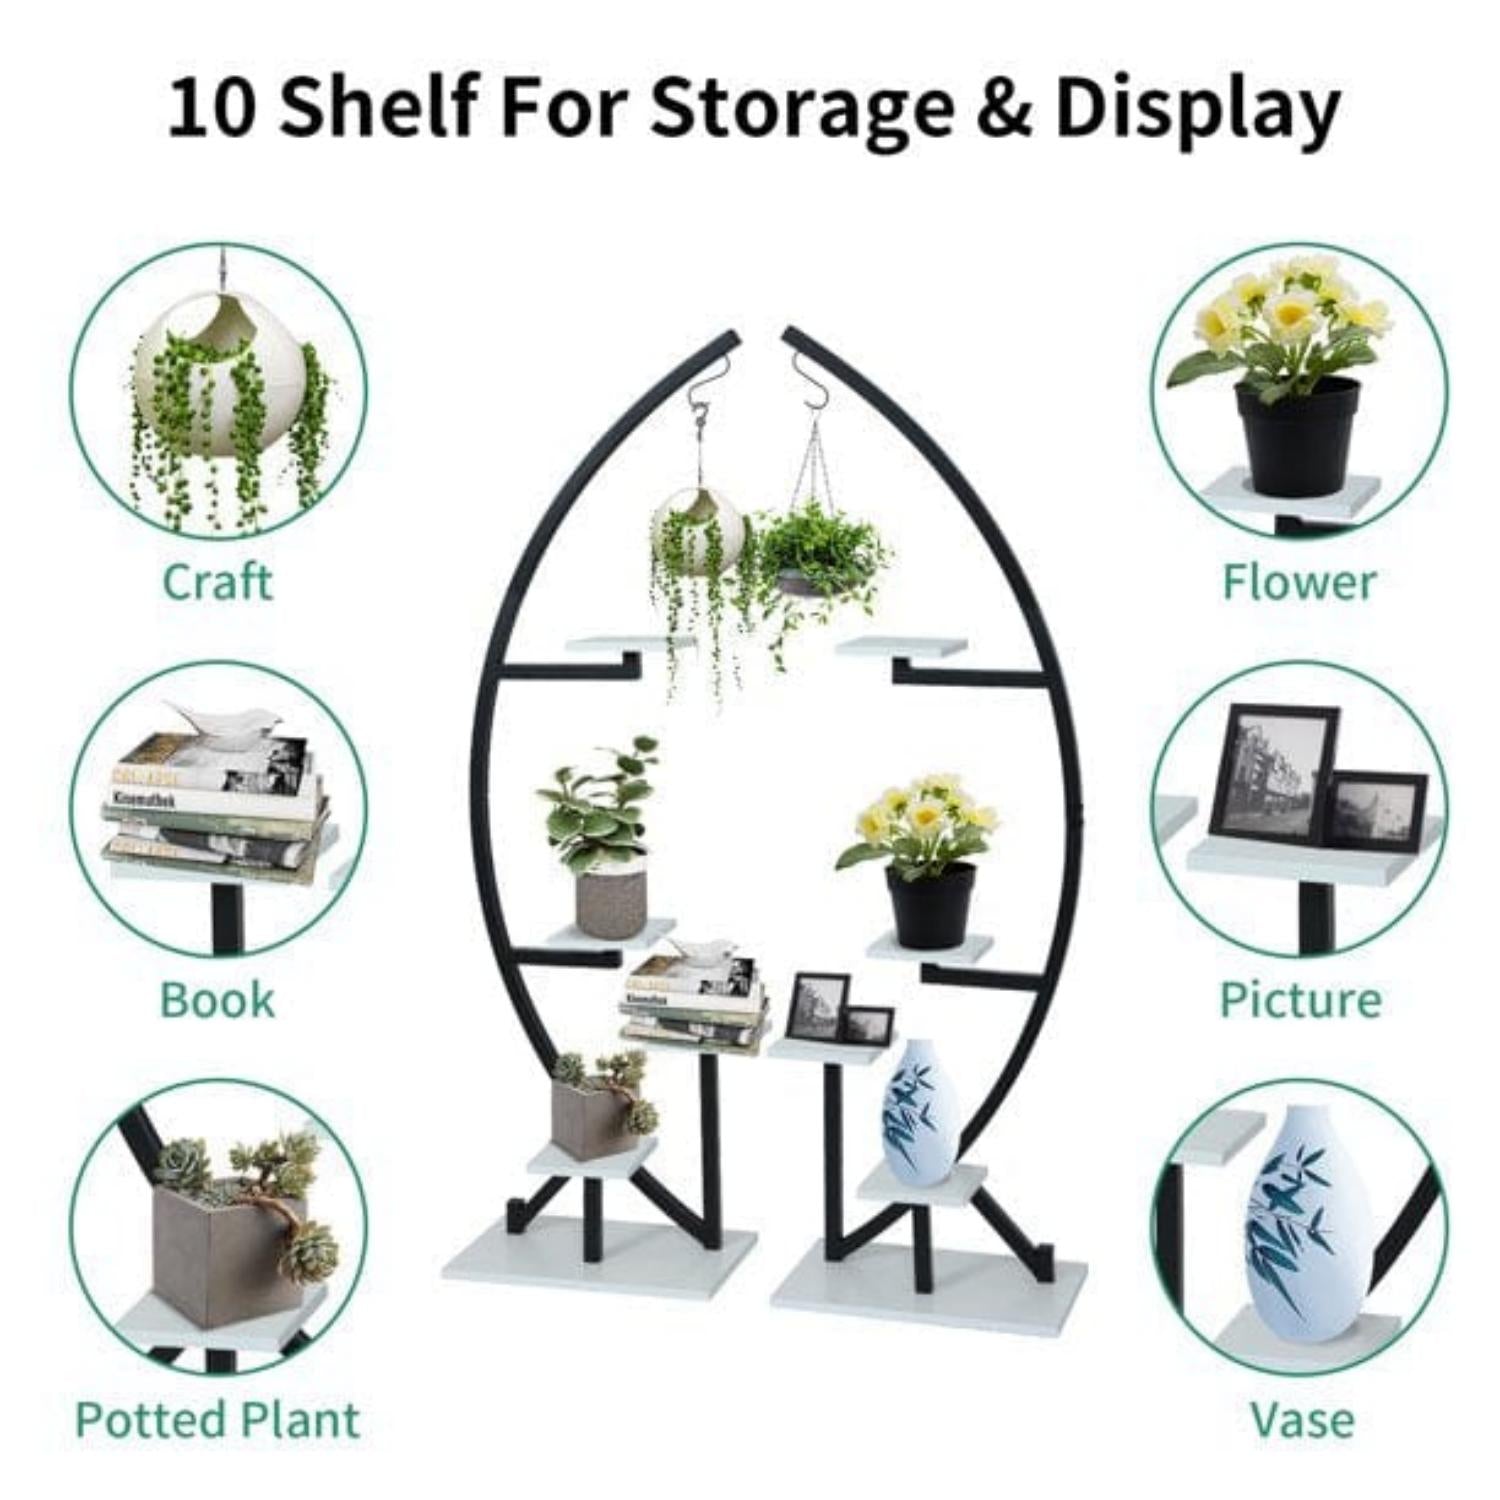 10 shelf for storage and display of Black White Plant Stand Indoor,2 PCS 5 Tier Half Moon Plant Shelf